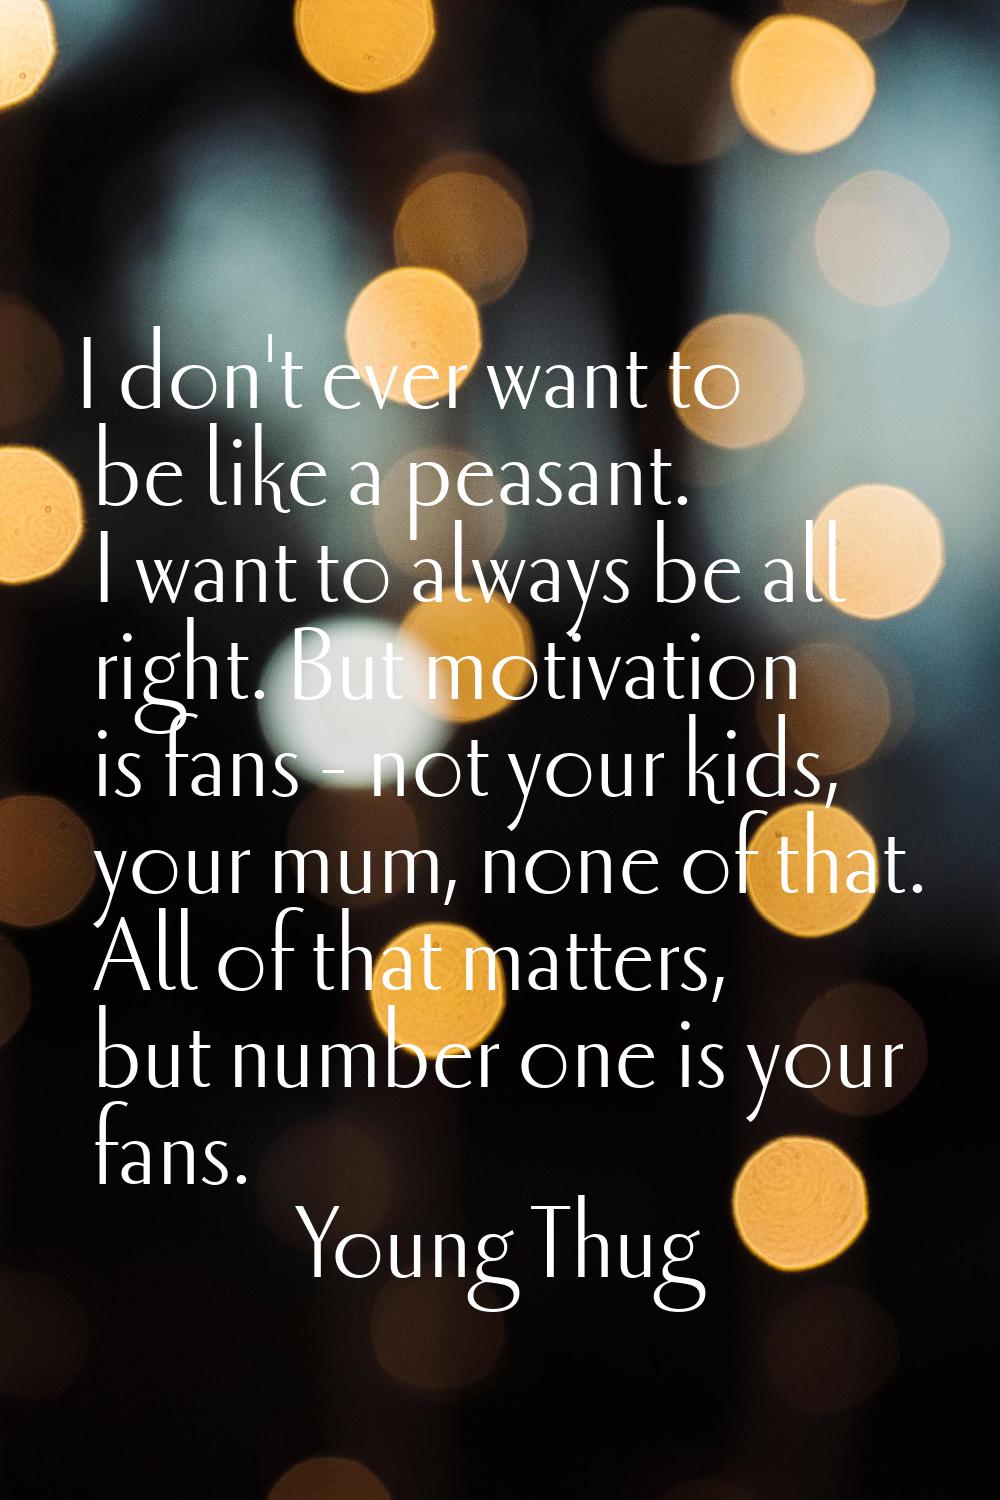 I don't ever want to be like a peasant. I want to always be all right. But motivation is fans - not